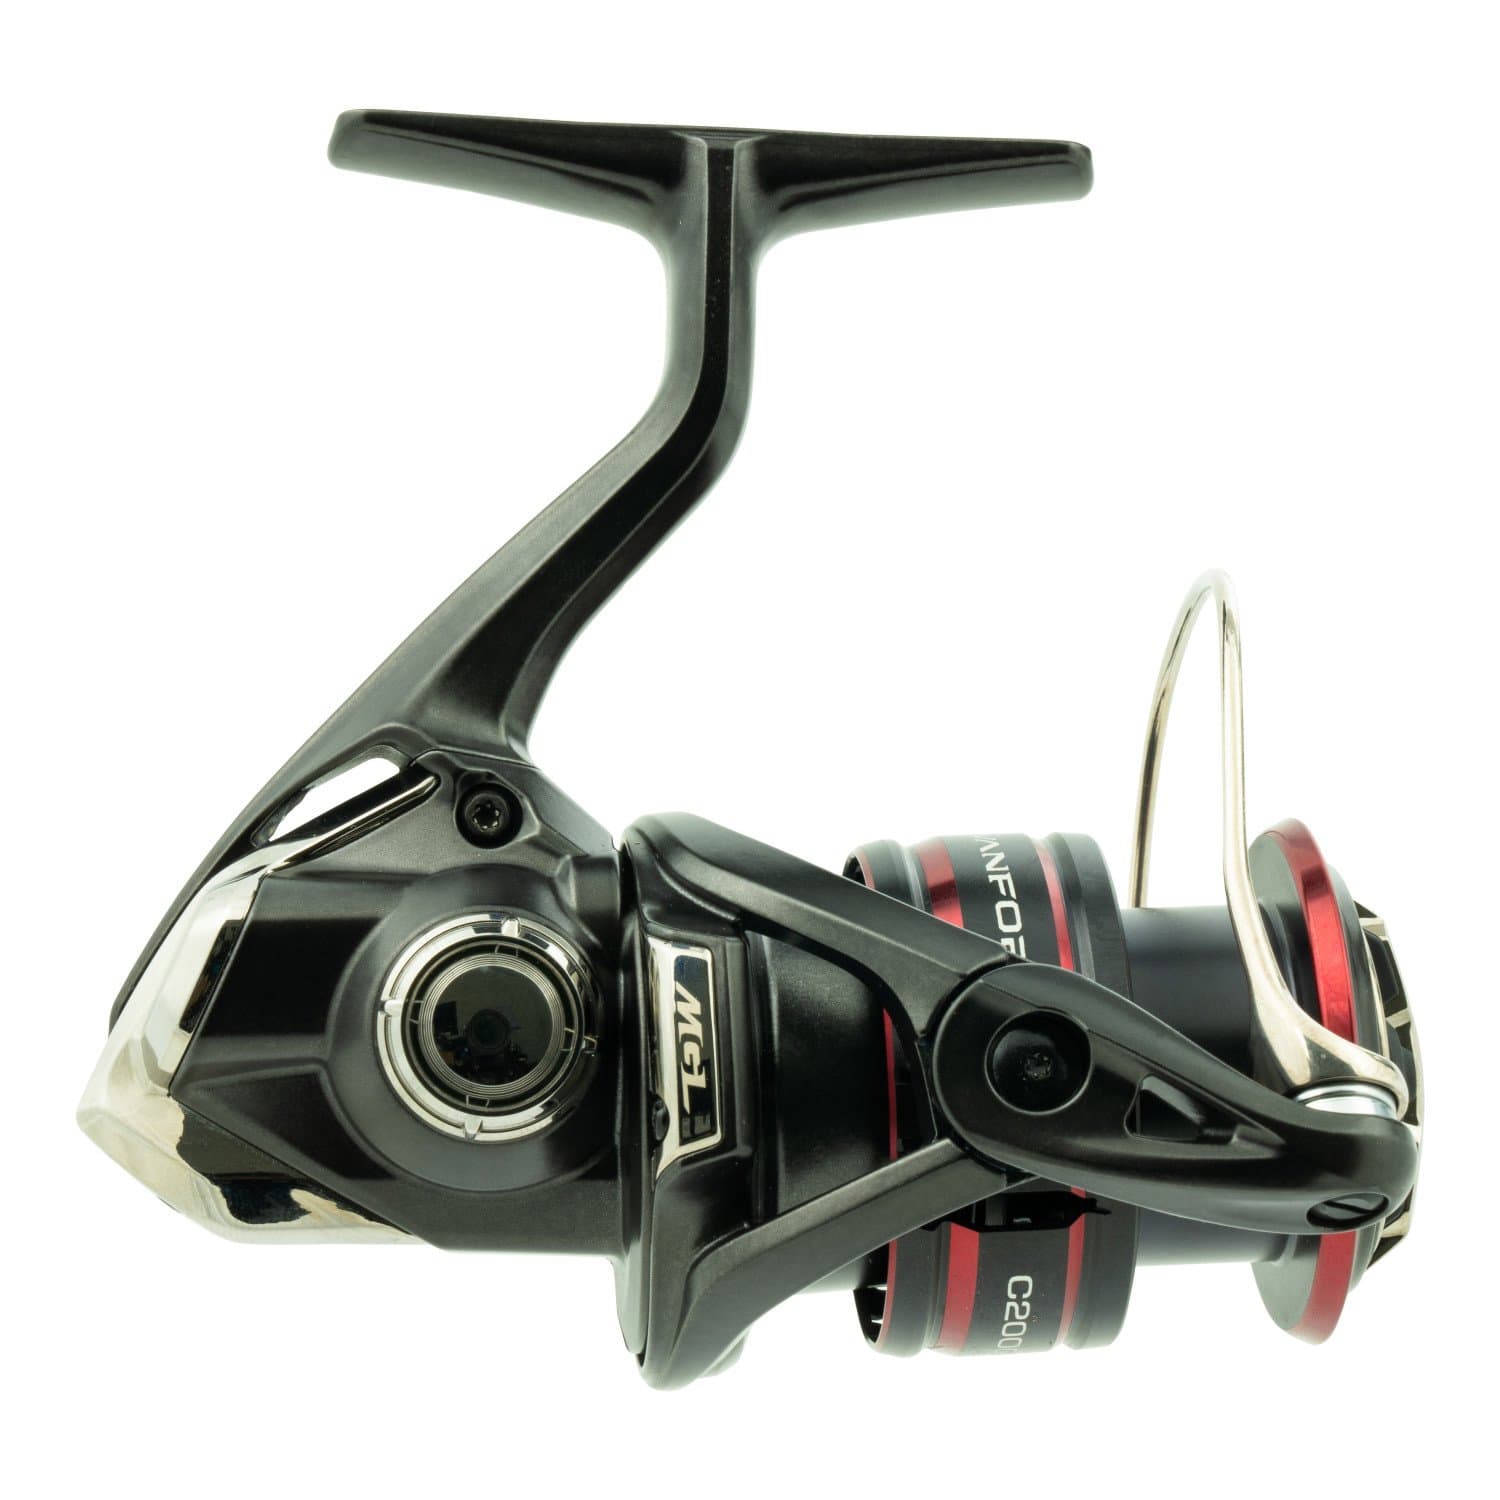 One of the most popular Spinning Reels Shimano 21 Twinpower SW C 5000 HG  Spinning Fishing Reel in 2021